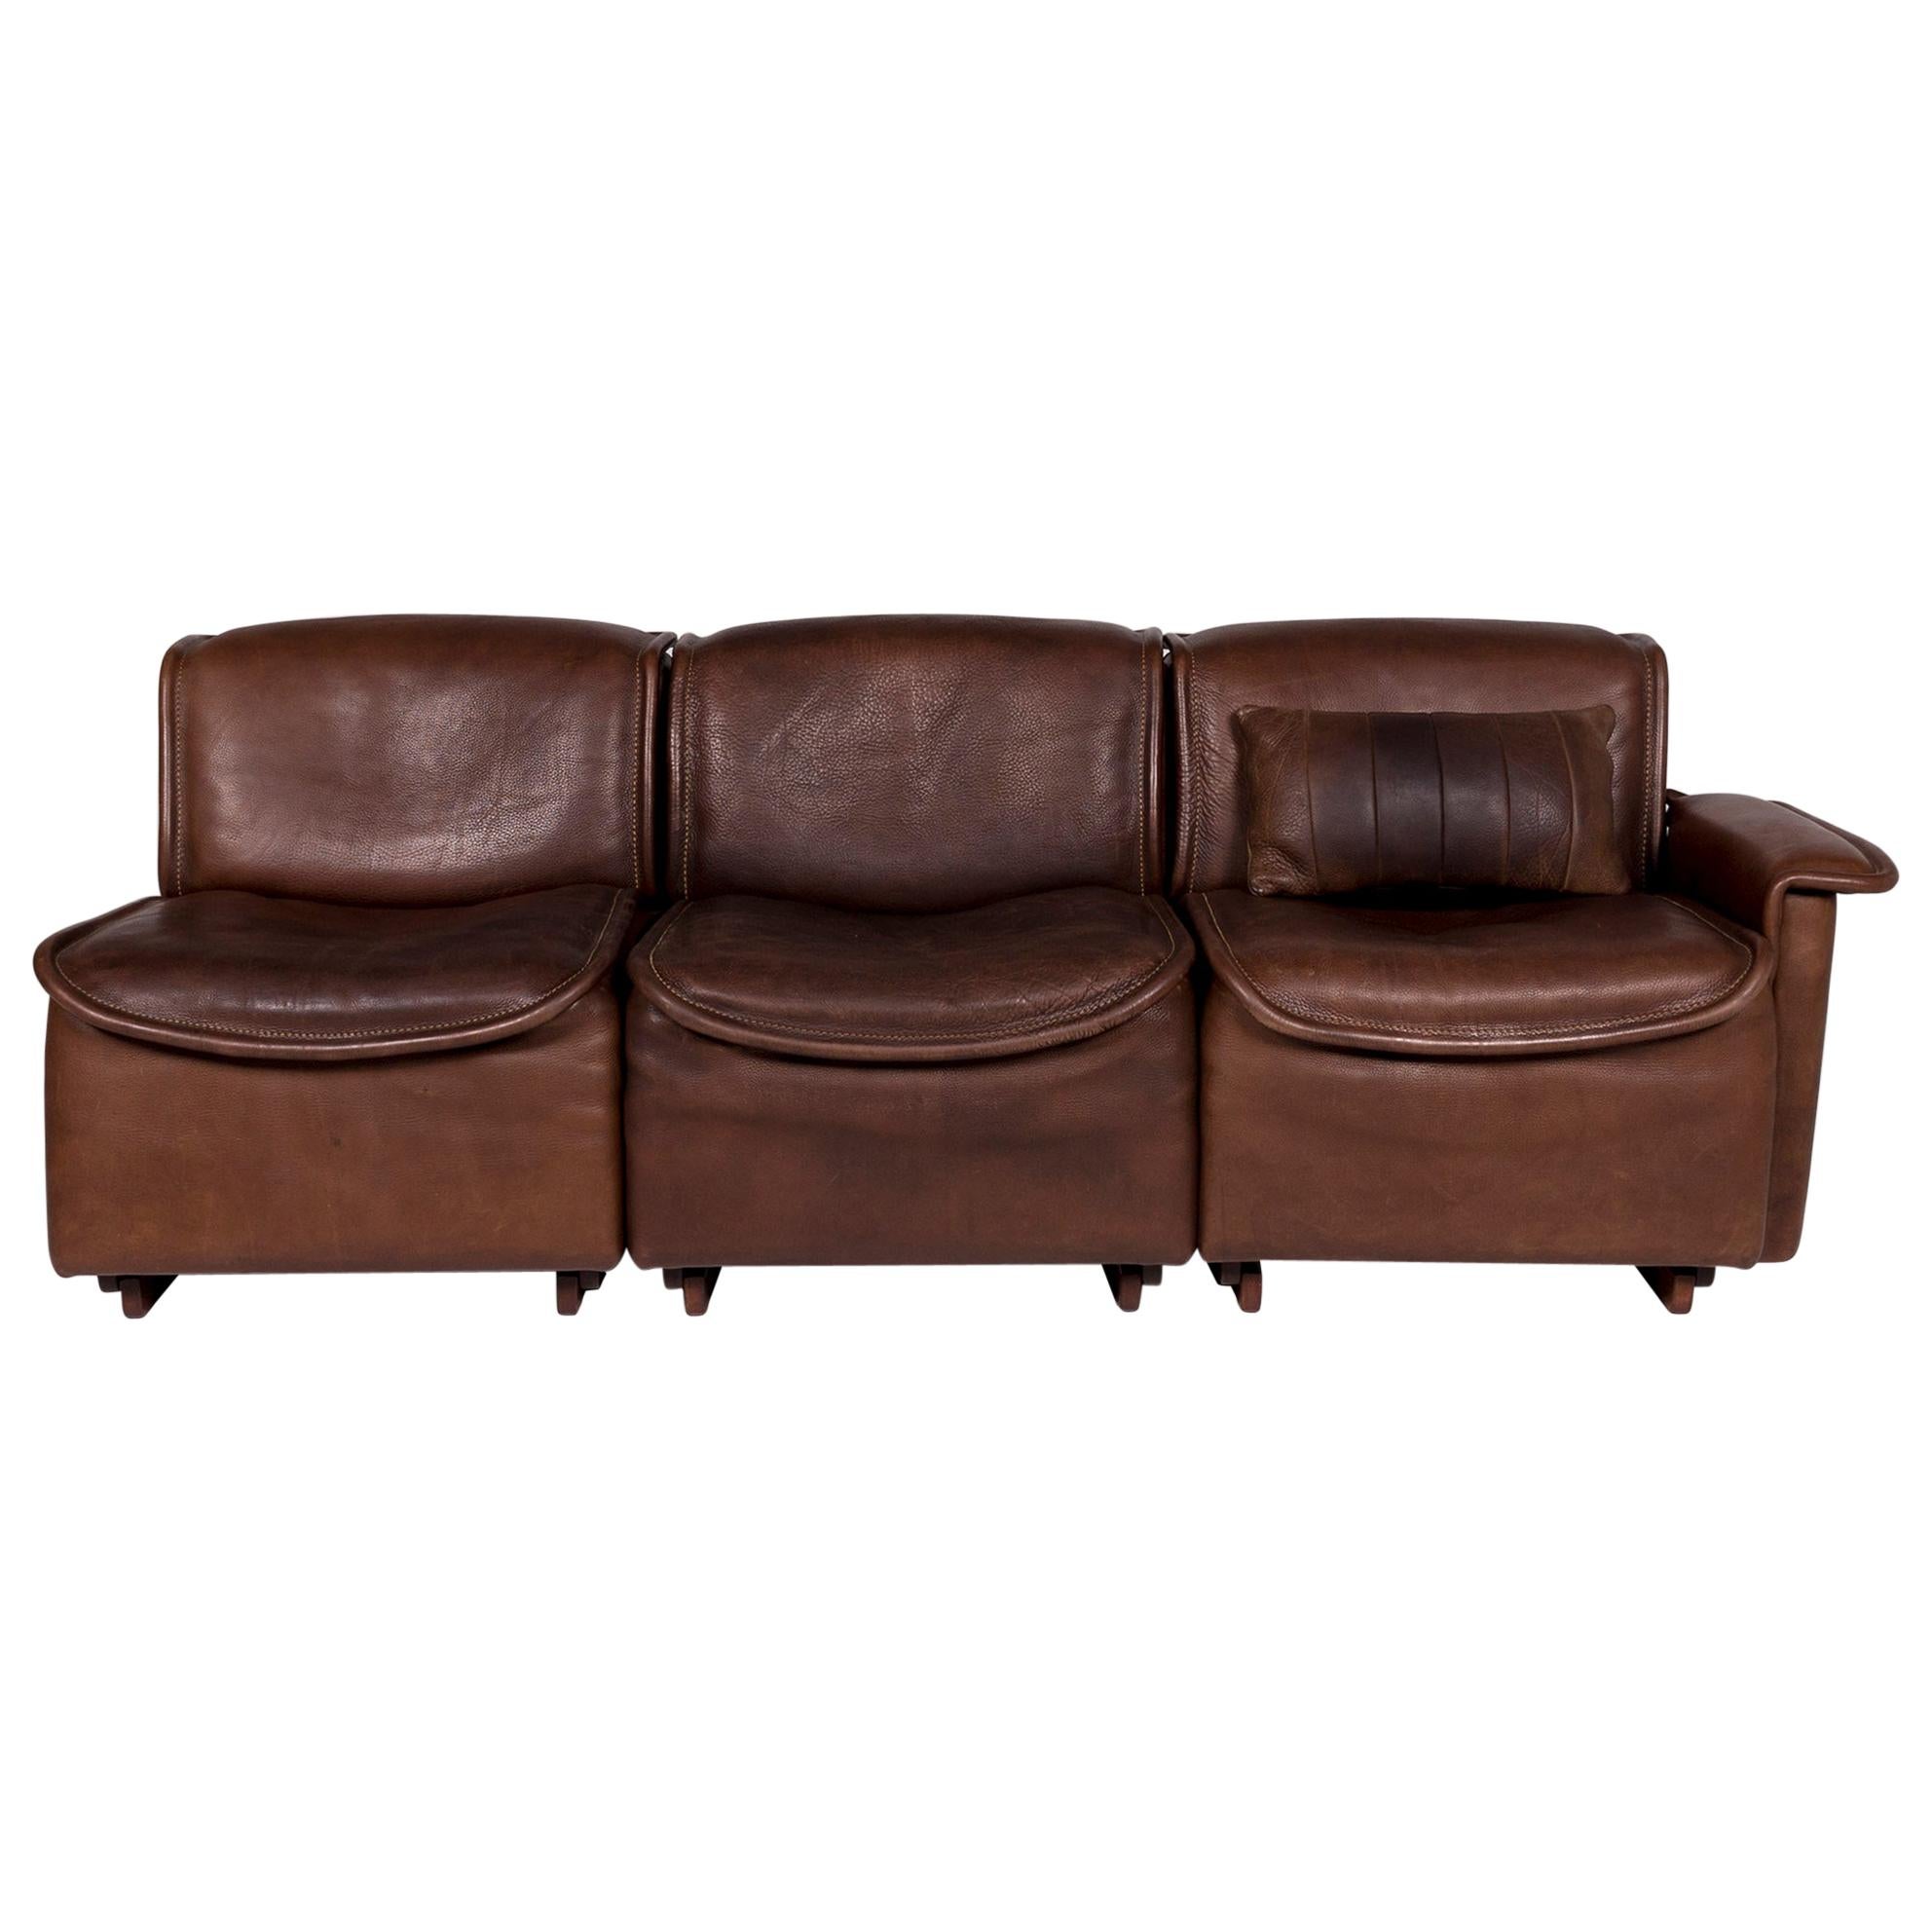 De Sede DS 12 Leather Sofa Brown Three-Seat Couch For Sale